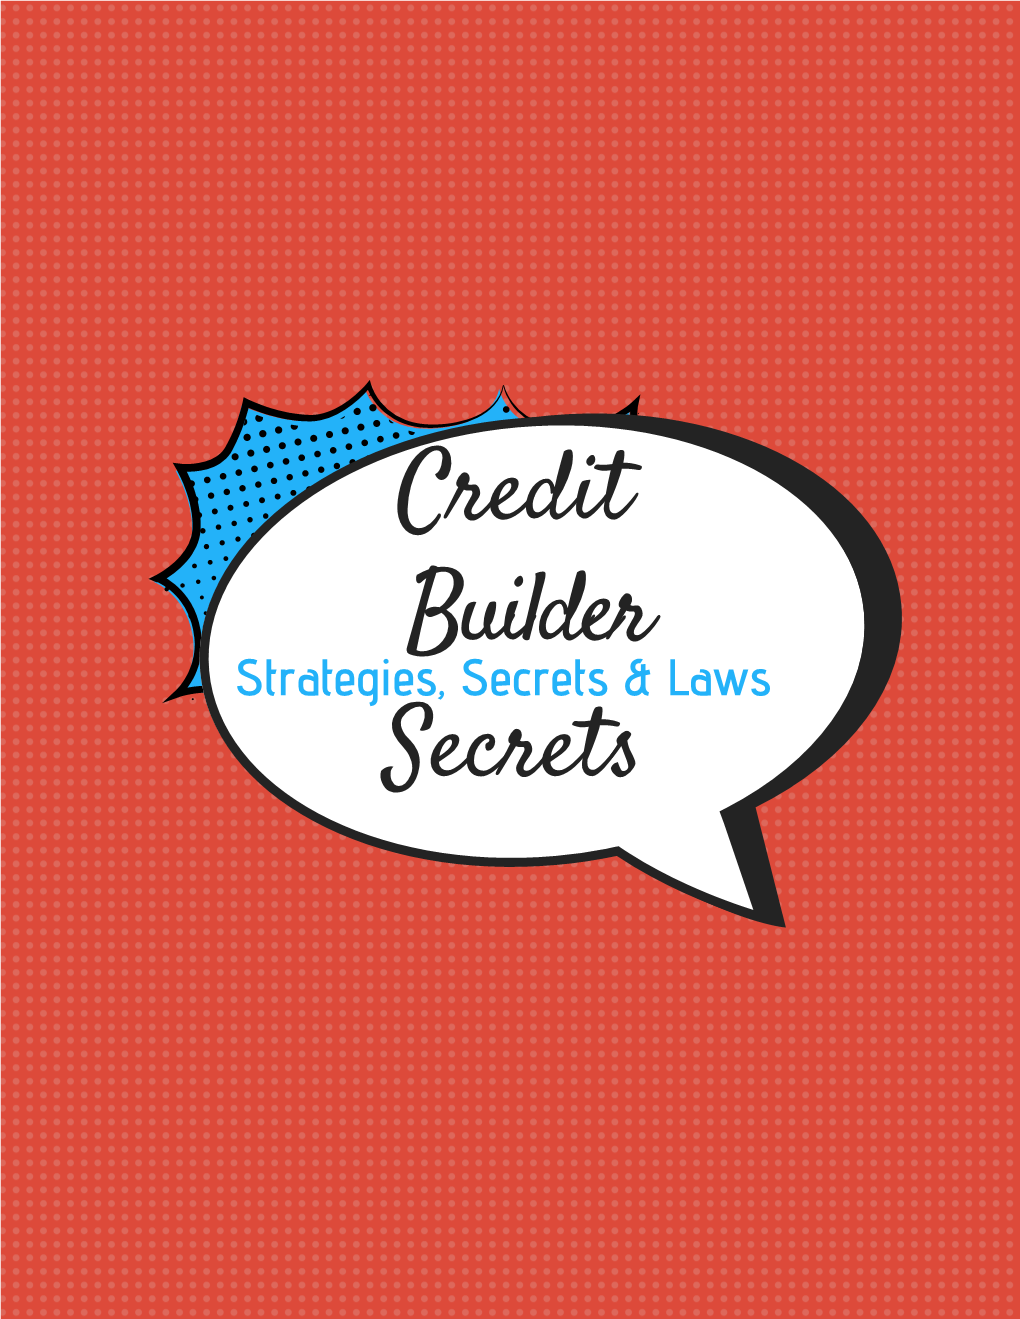 Why Credit Matters If You're Reading This Book, You Probably Have Some